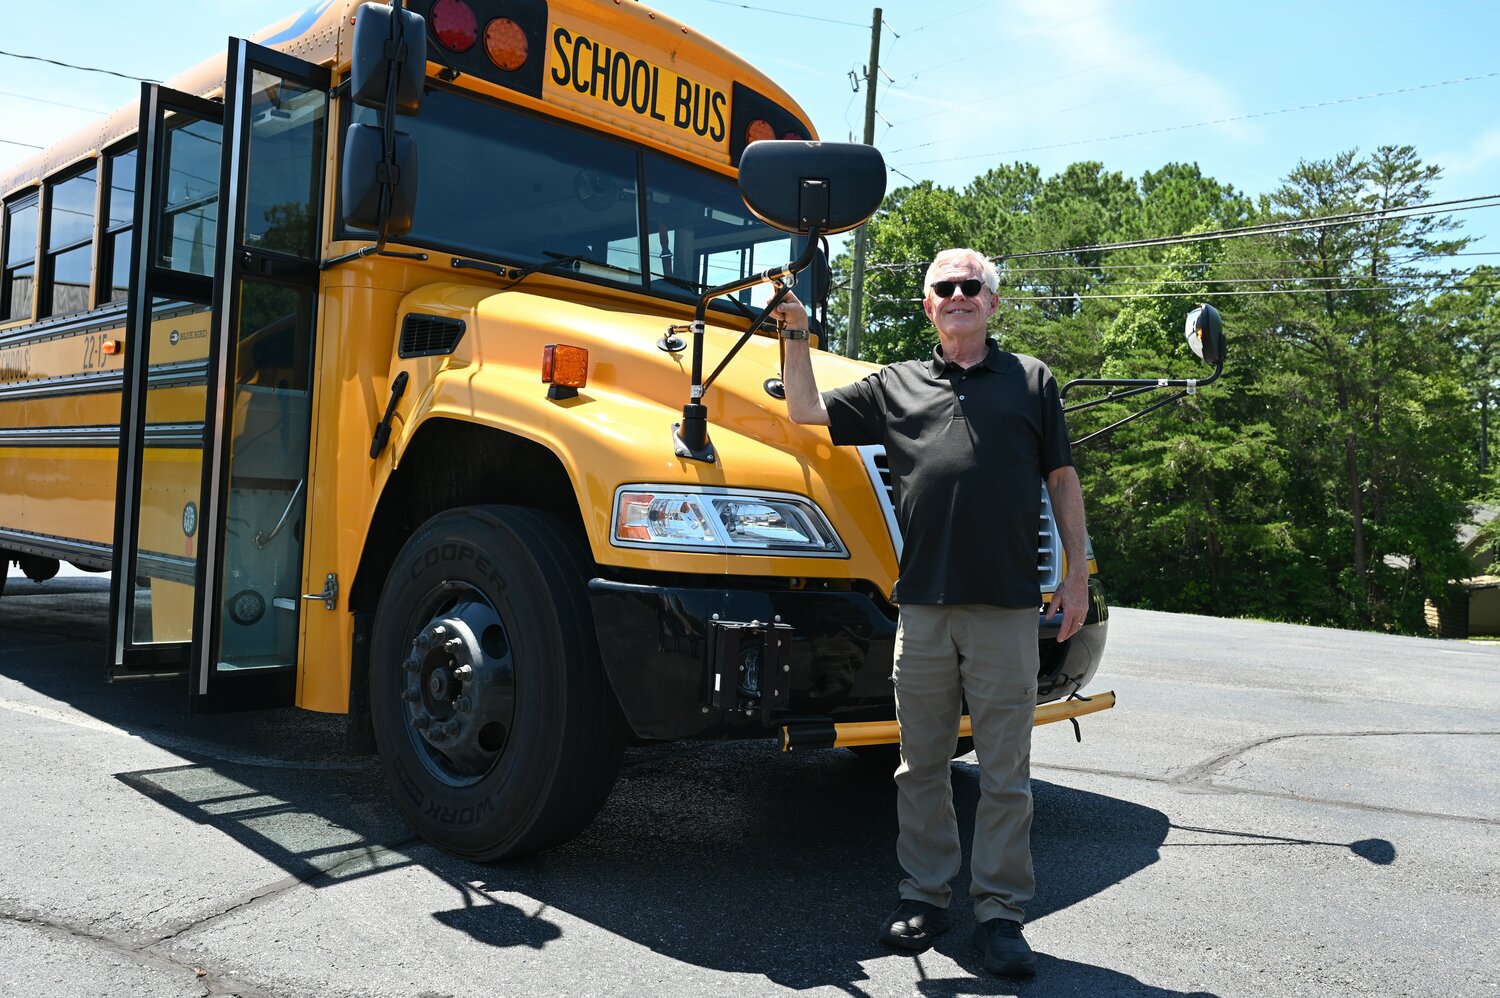 Holly Creek Baptist Church worship pastor Robert Richardson poses for a photo with the school bus he drives. (Index/Roger Alford)